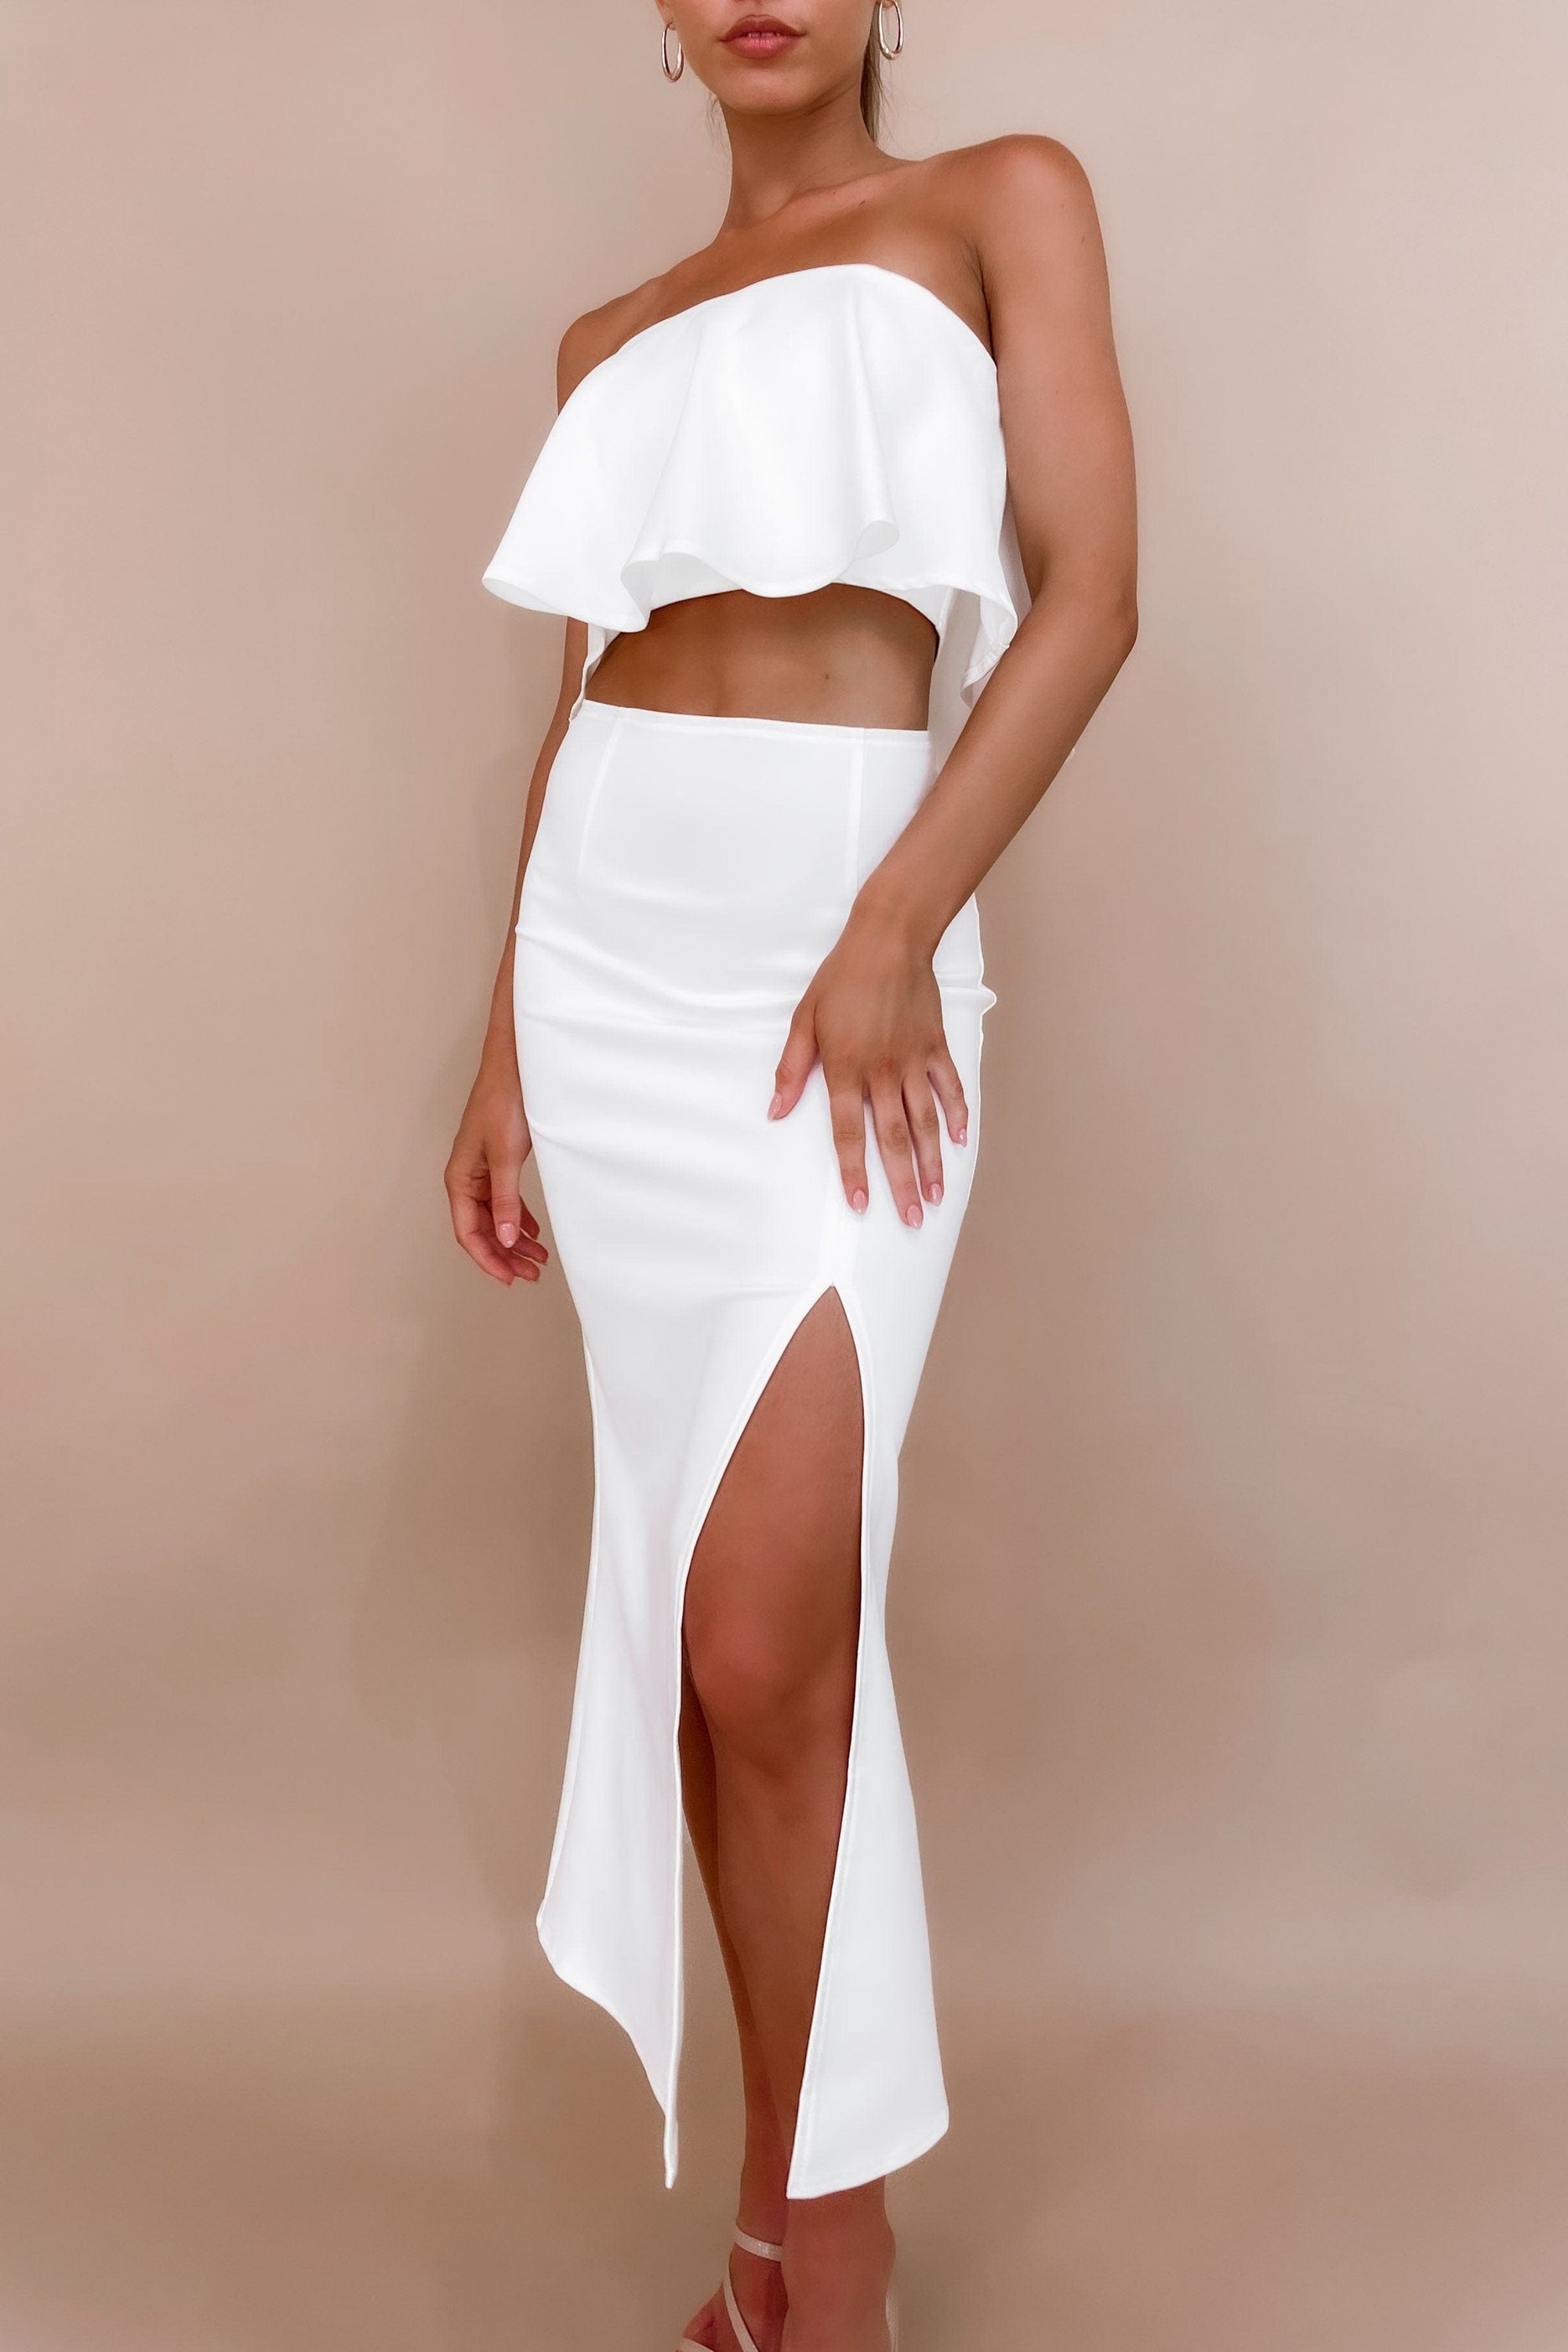 Mellie Set, BOTTOMS, CROP TOP, CROP TOPS, HIGH WAISTED SETS, MIDI SKIRT, new arrivals, POLYESTER & SPANDEX, POLYESTER AND SPANDEX, SETS, SKIRTS, SPANDEX AND POLYESTER, TOP, TOPS, WHITE, , -MISHKAH